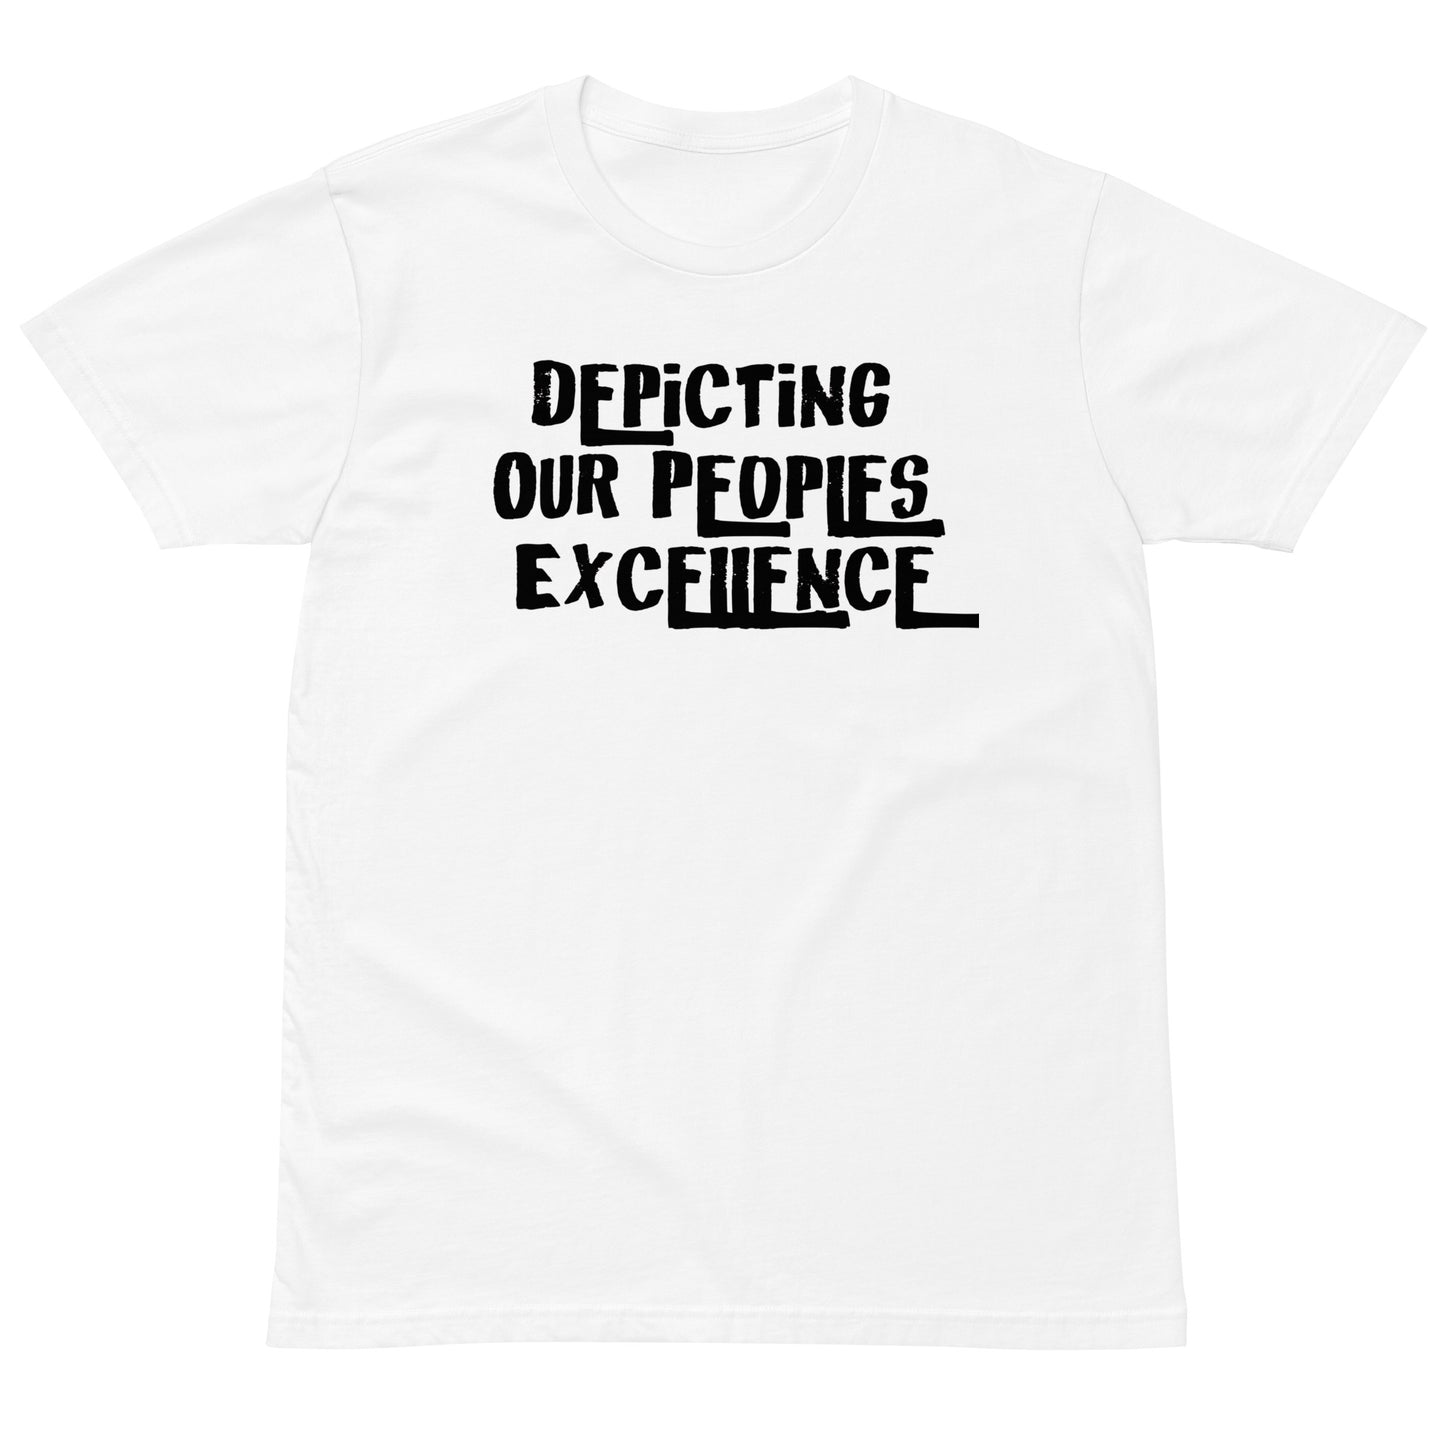 Depicting Our Peoples Excellence premium t-shirt